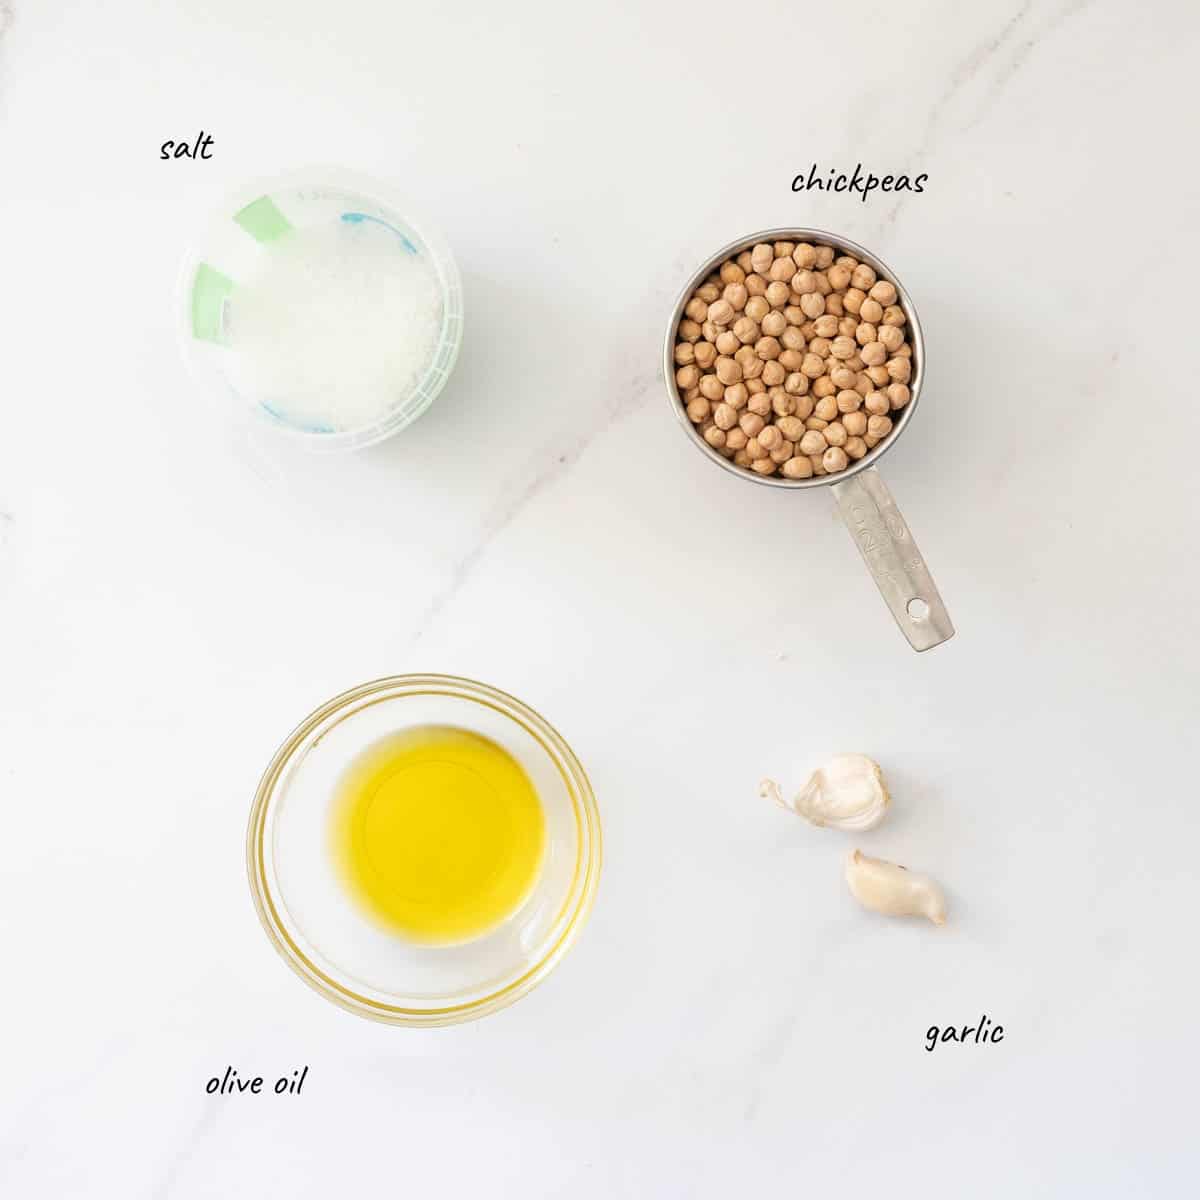 the ingredients to make garlic roasted chickpeas laid out on a bench top with text overlay.